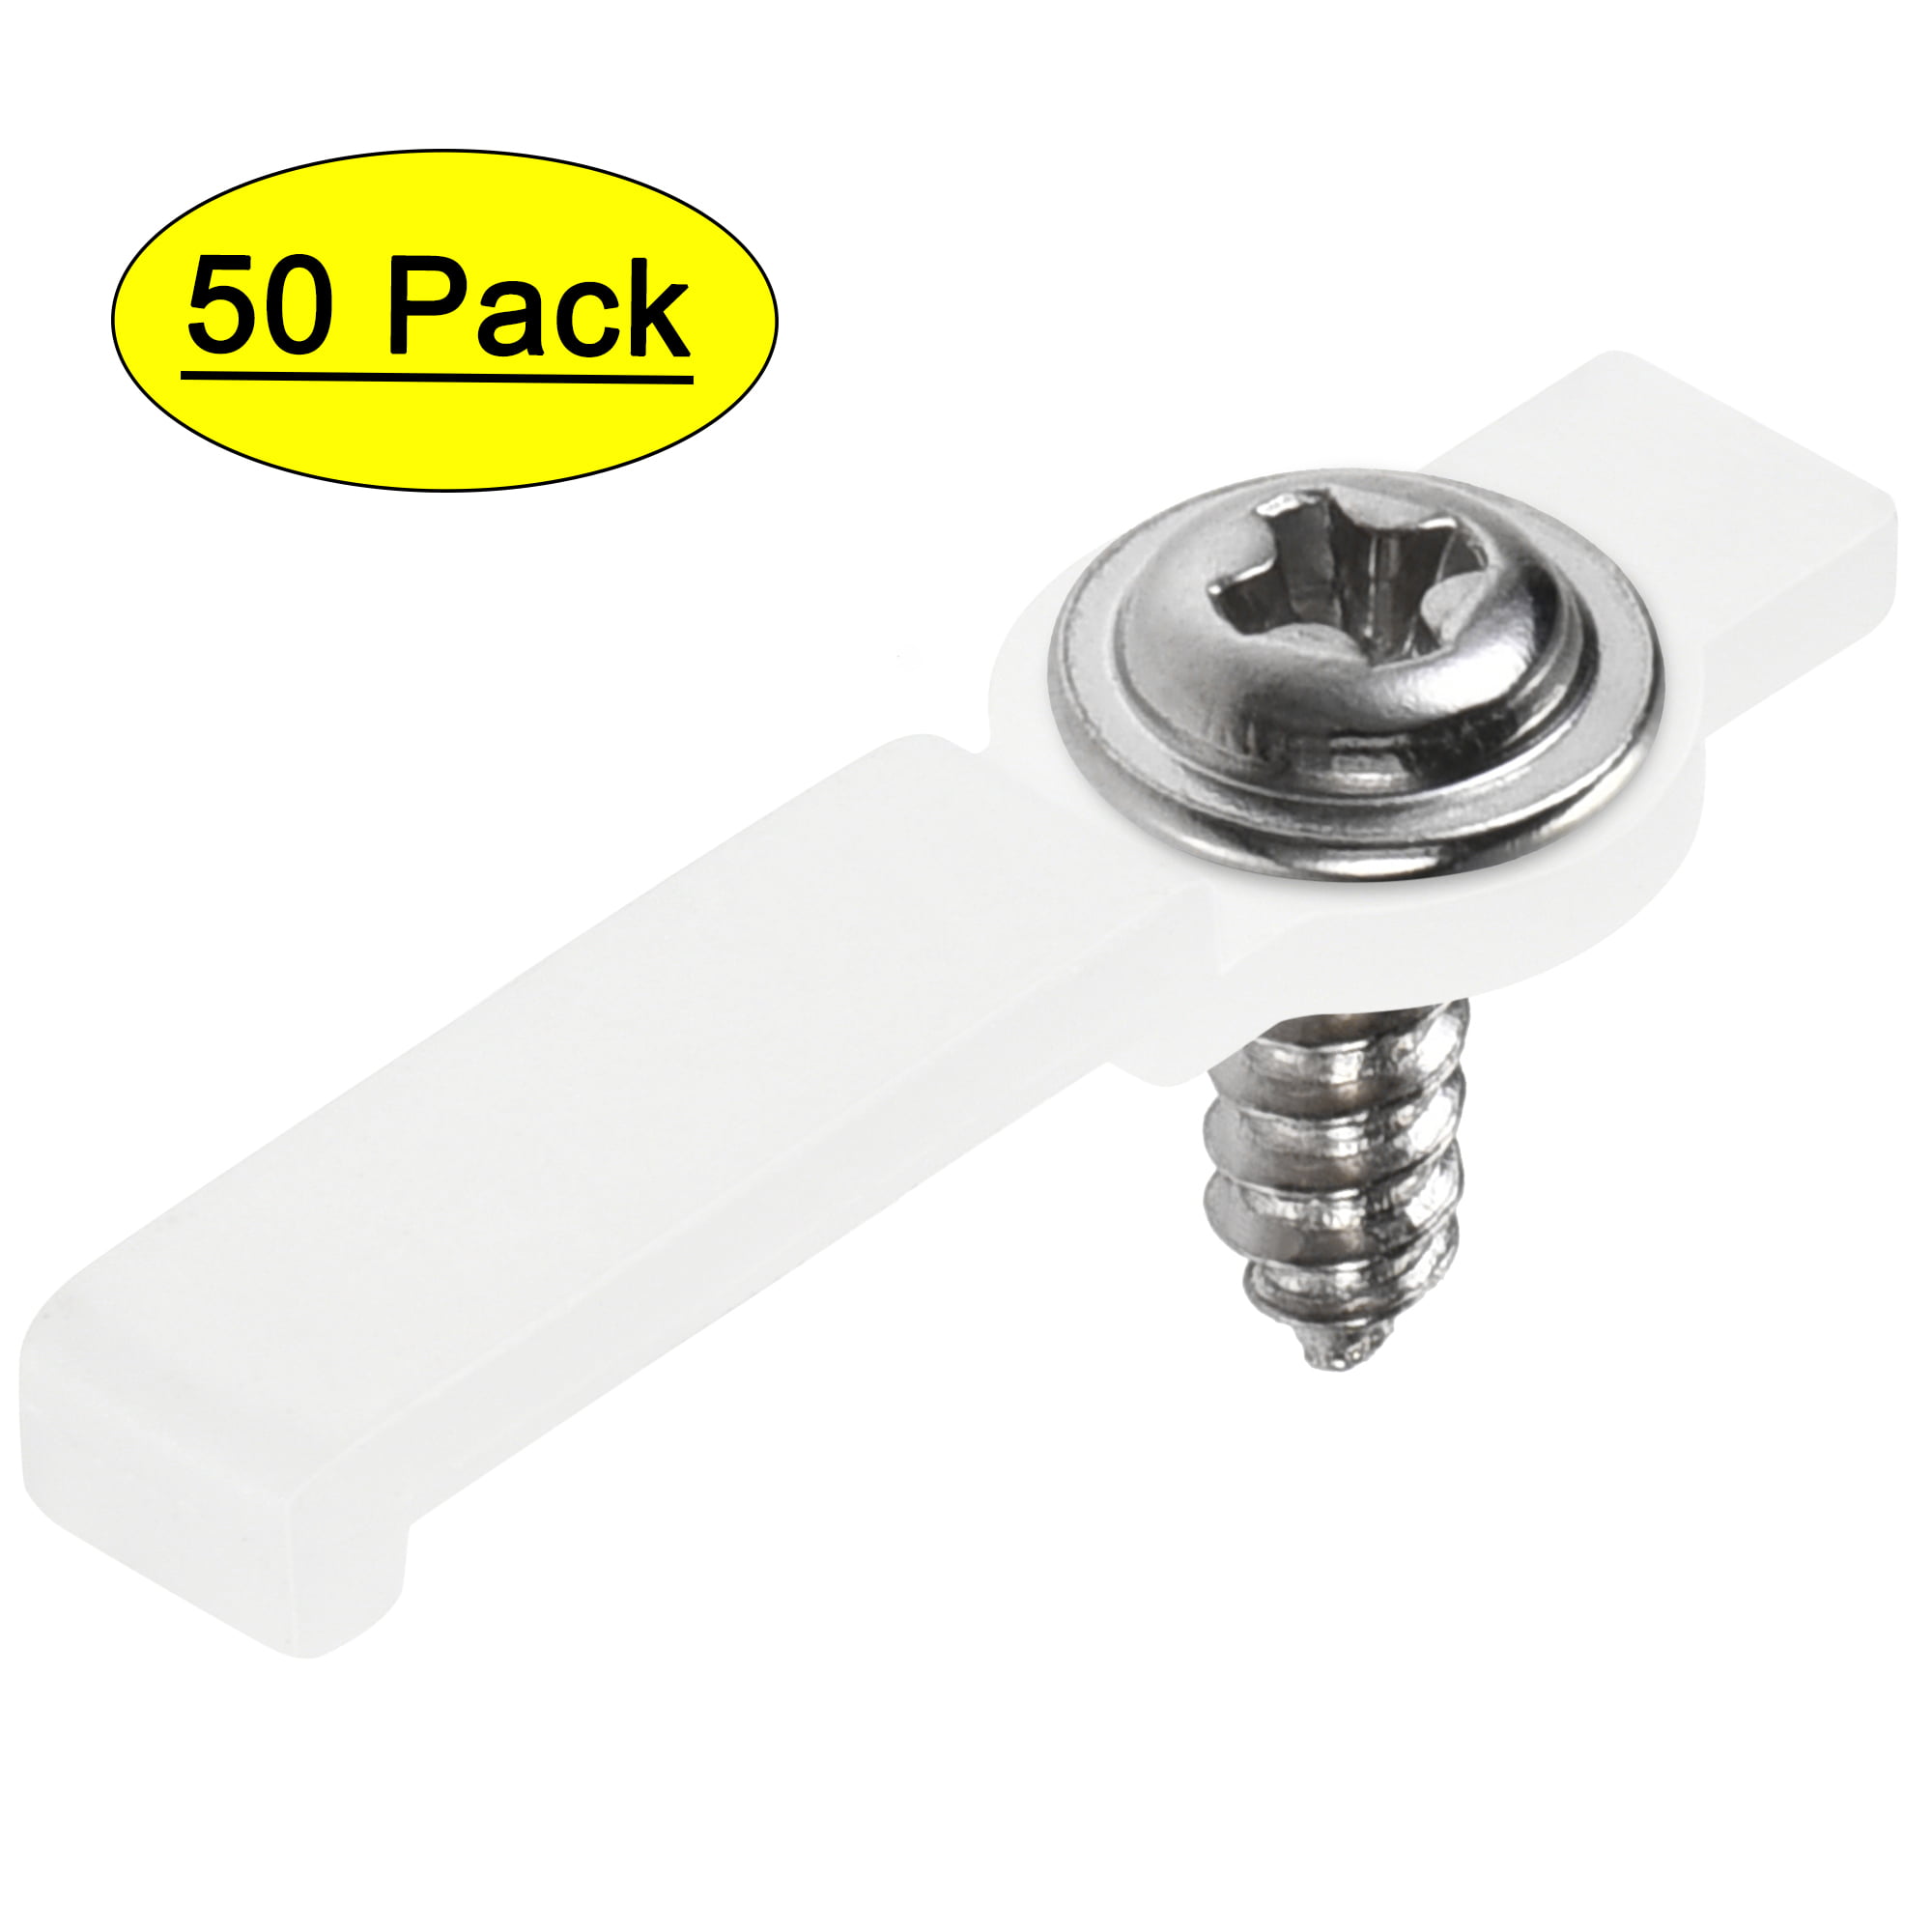 50x Mounting Bracket Fixing Clip+Screws for Non-waterproof 10mm LED Light Strip 